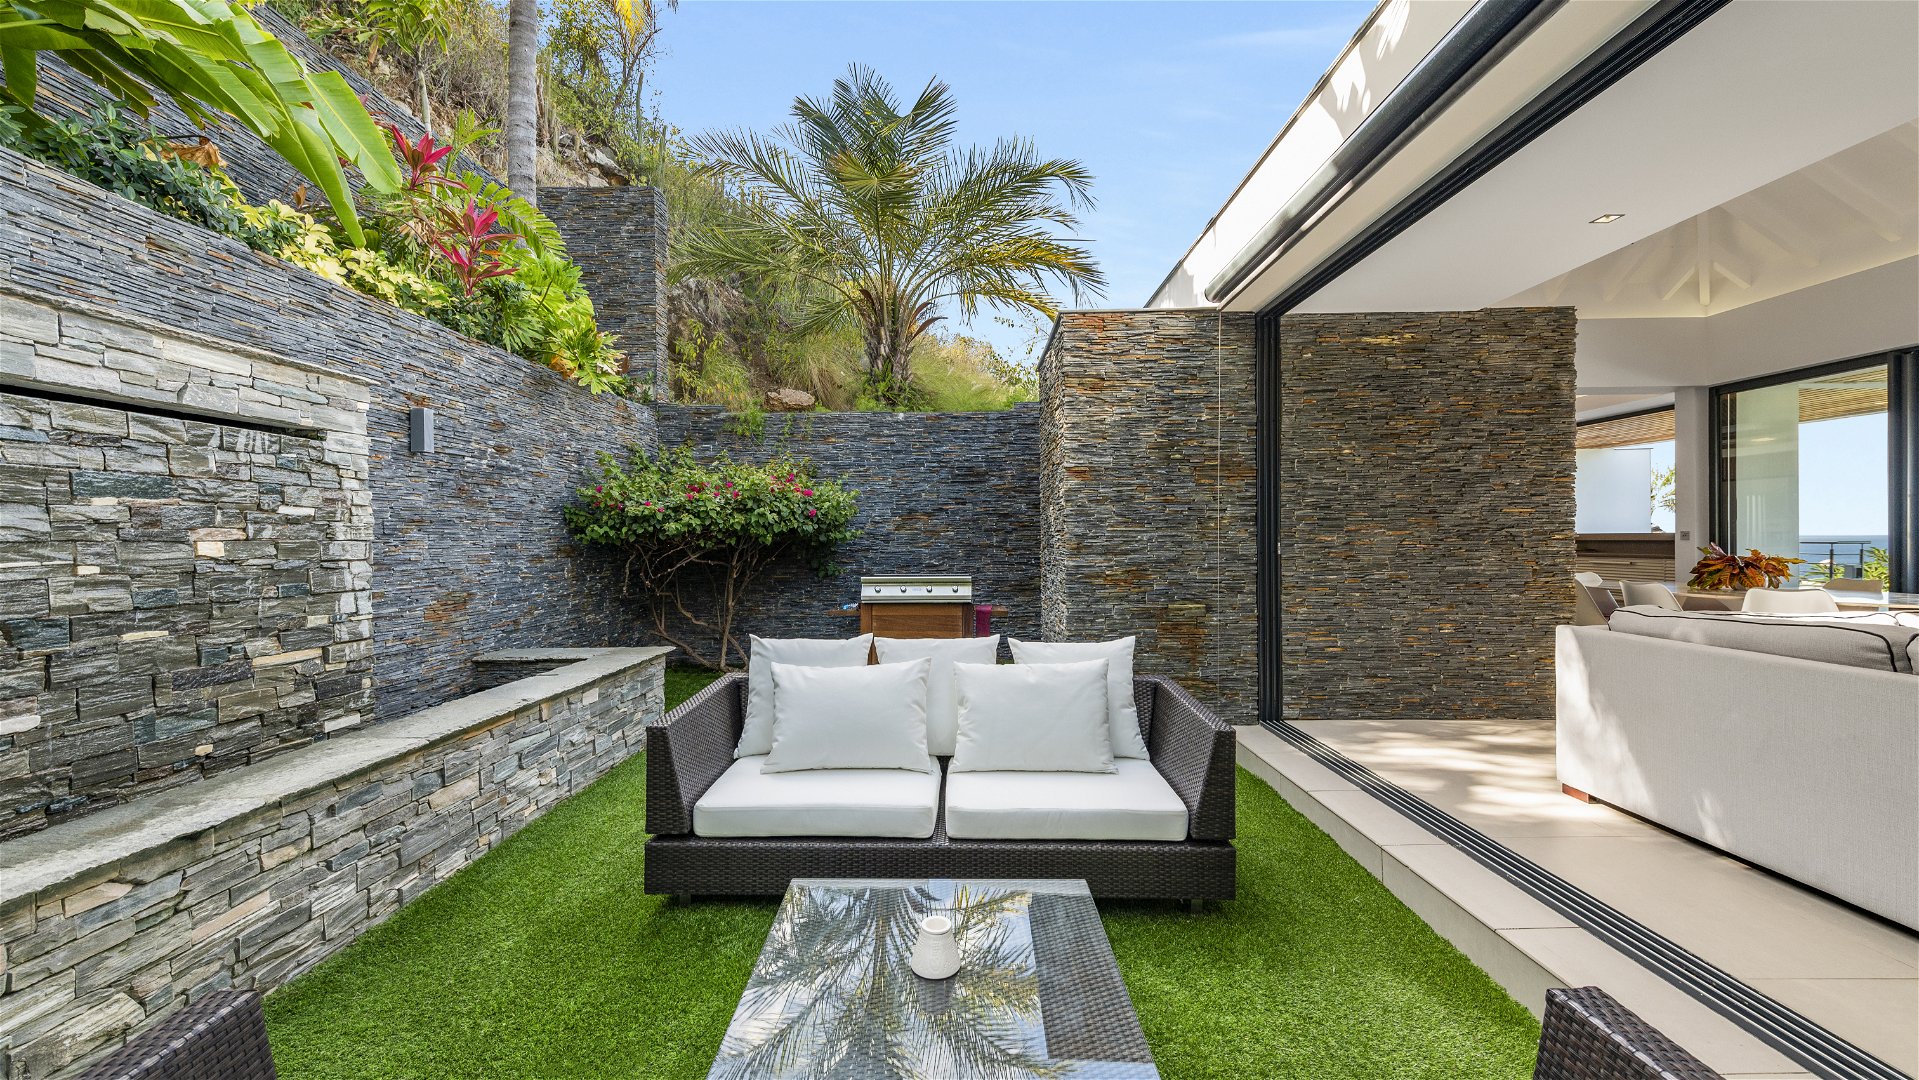 OUTDOOR LOUNGE AREAS